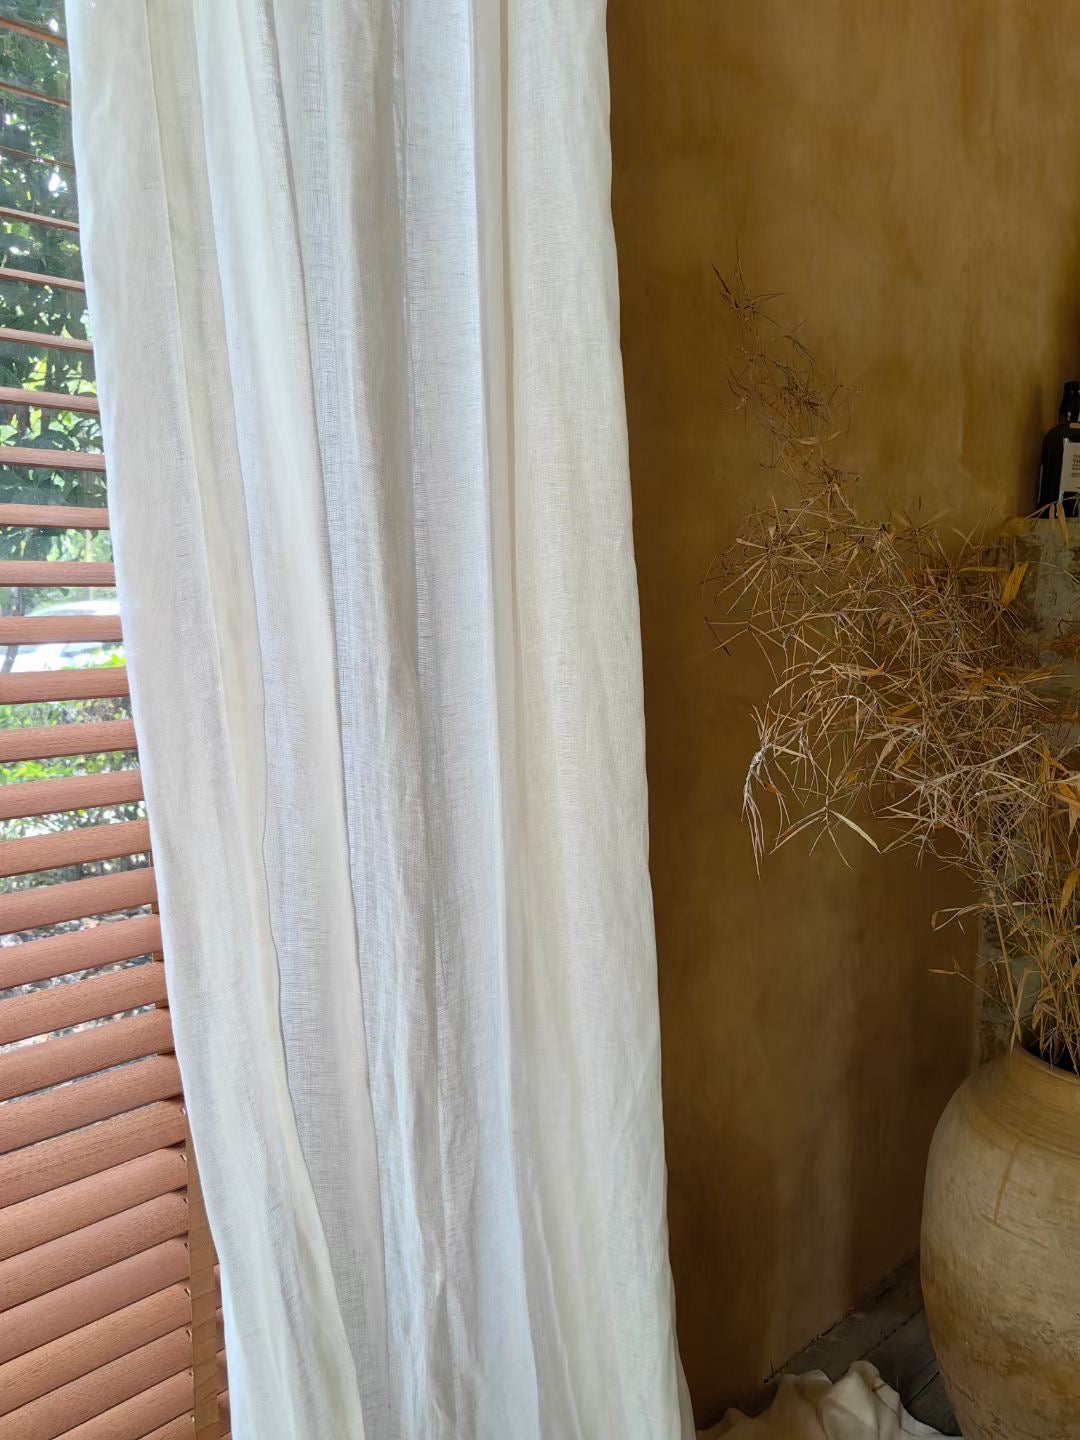 Pure white French-imported linen curtain hanging by a sunlit window, enhancing the serene decor of a room with a rustic yellow wall and natural elements